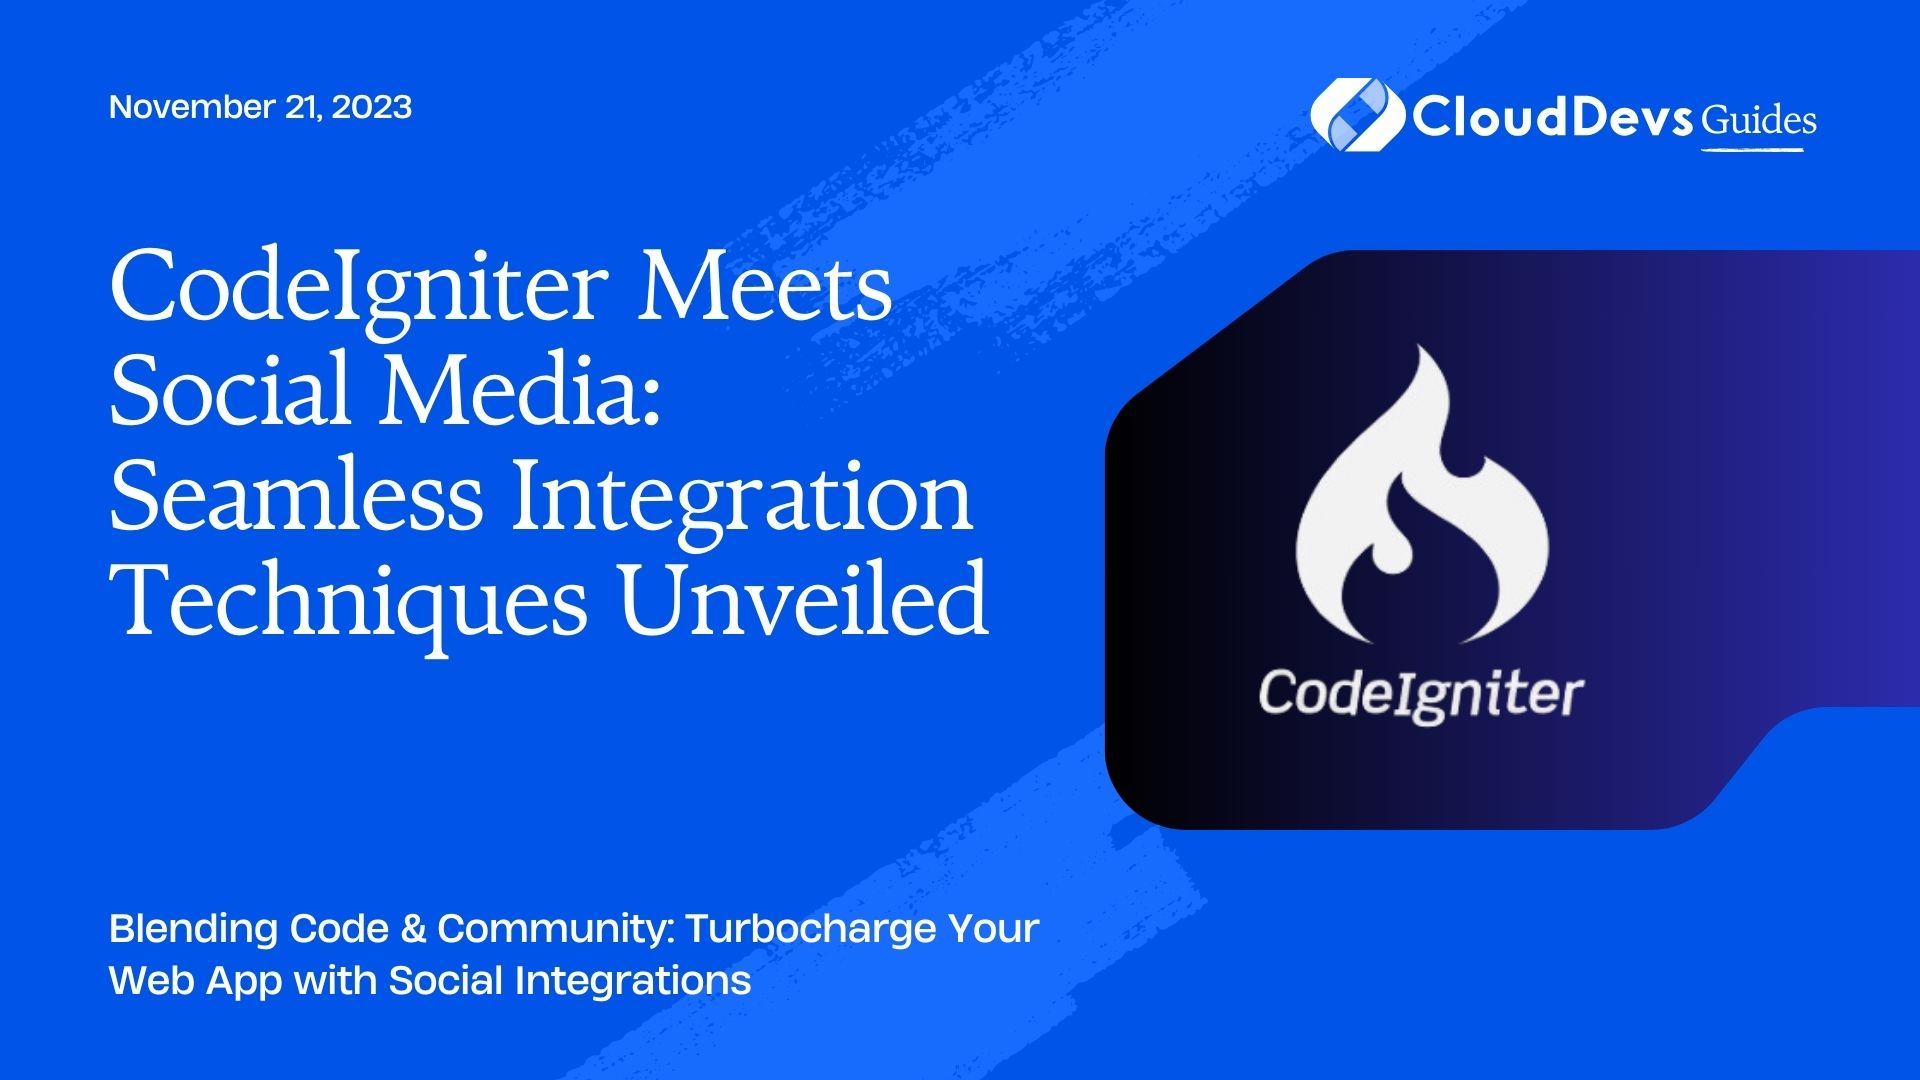 CodeIgniter Meets Social Media: Seamless Integration Techniques Unveiled